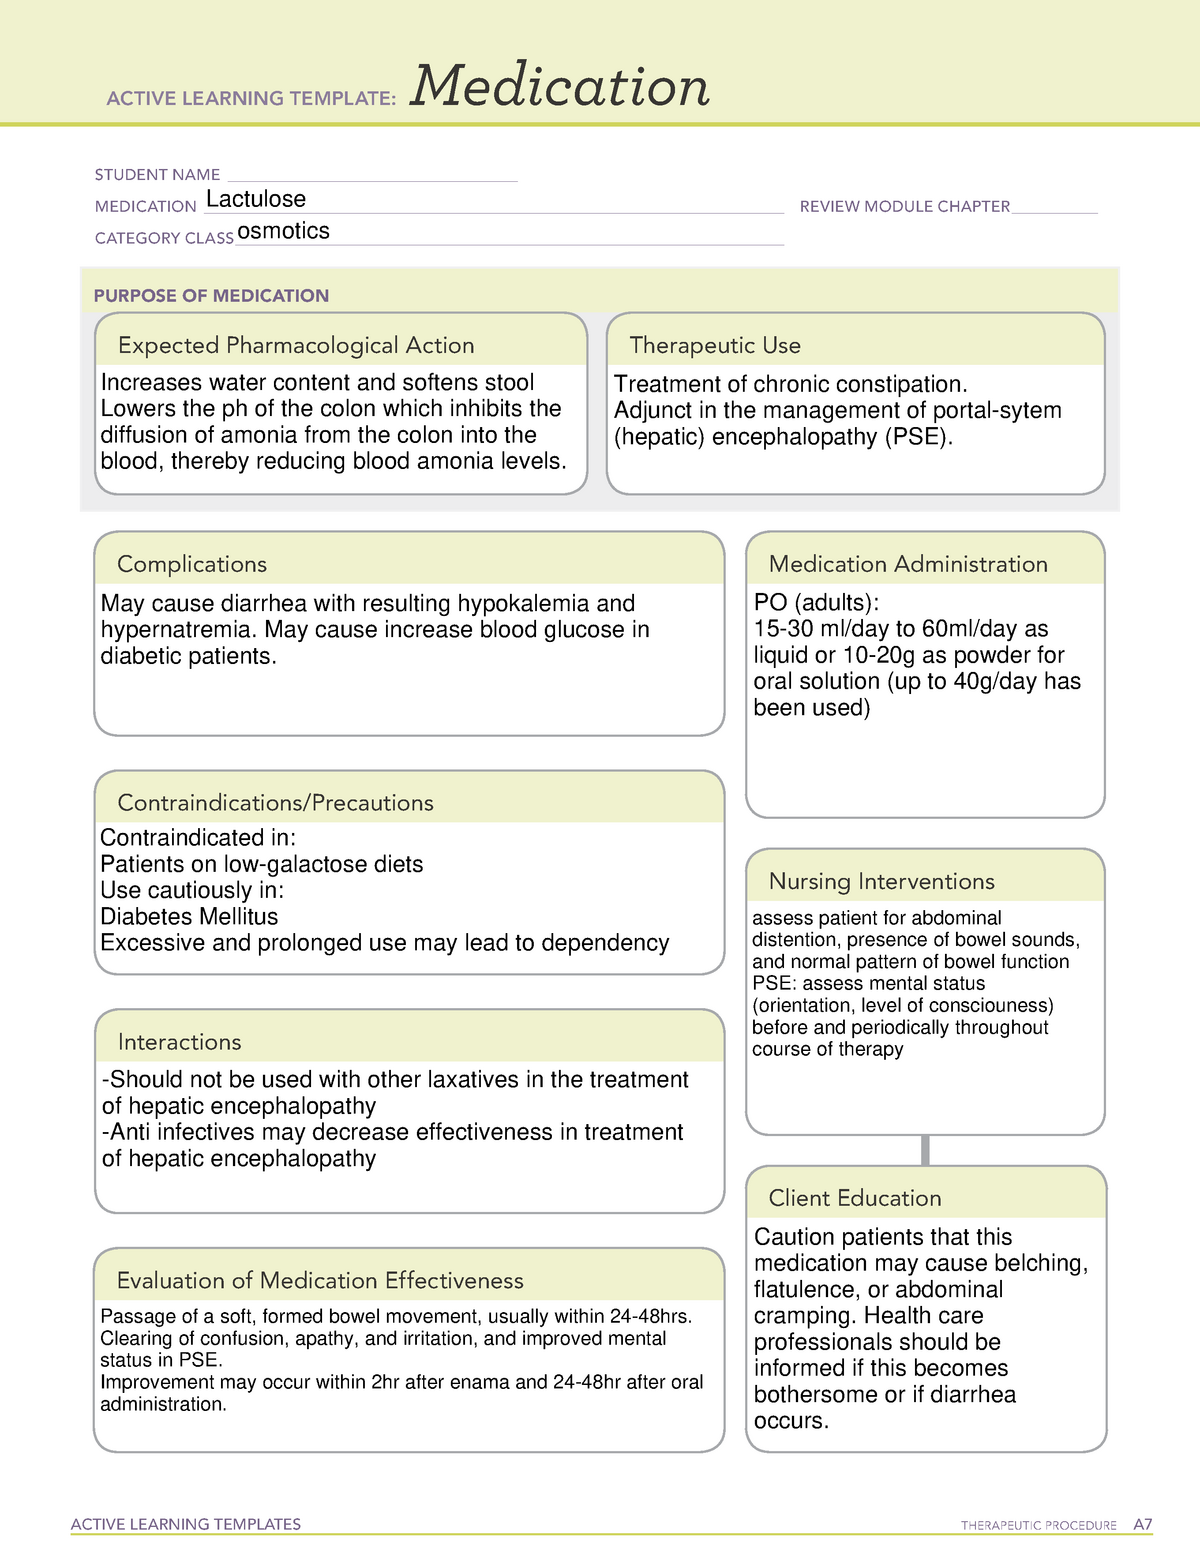 Lactulose clinical work ACTIVE LEARNING TEMPLATES THERAPEUTIC